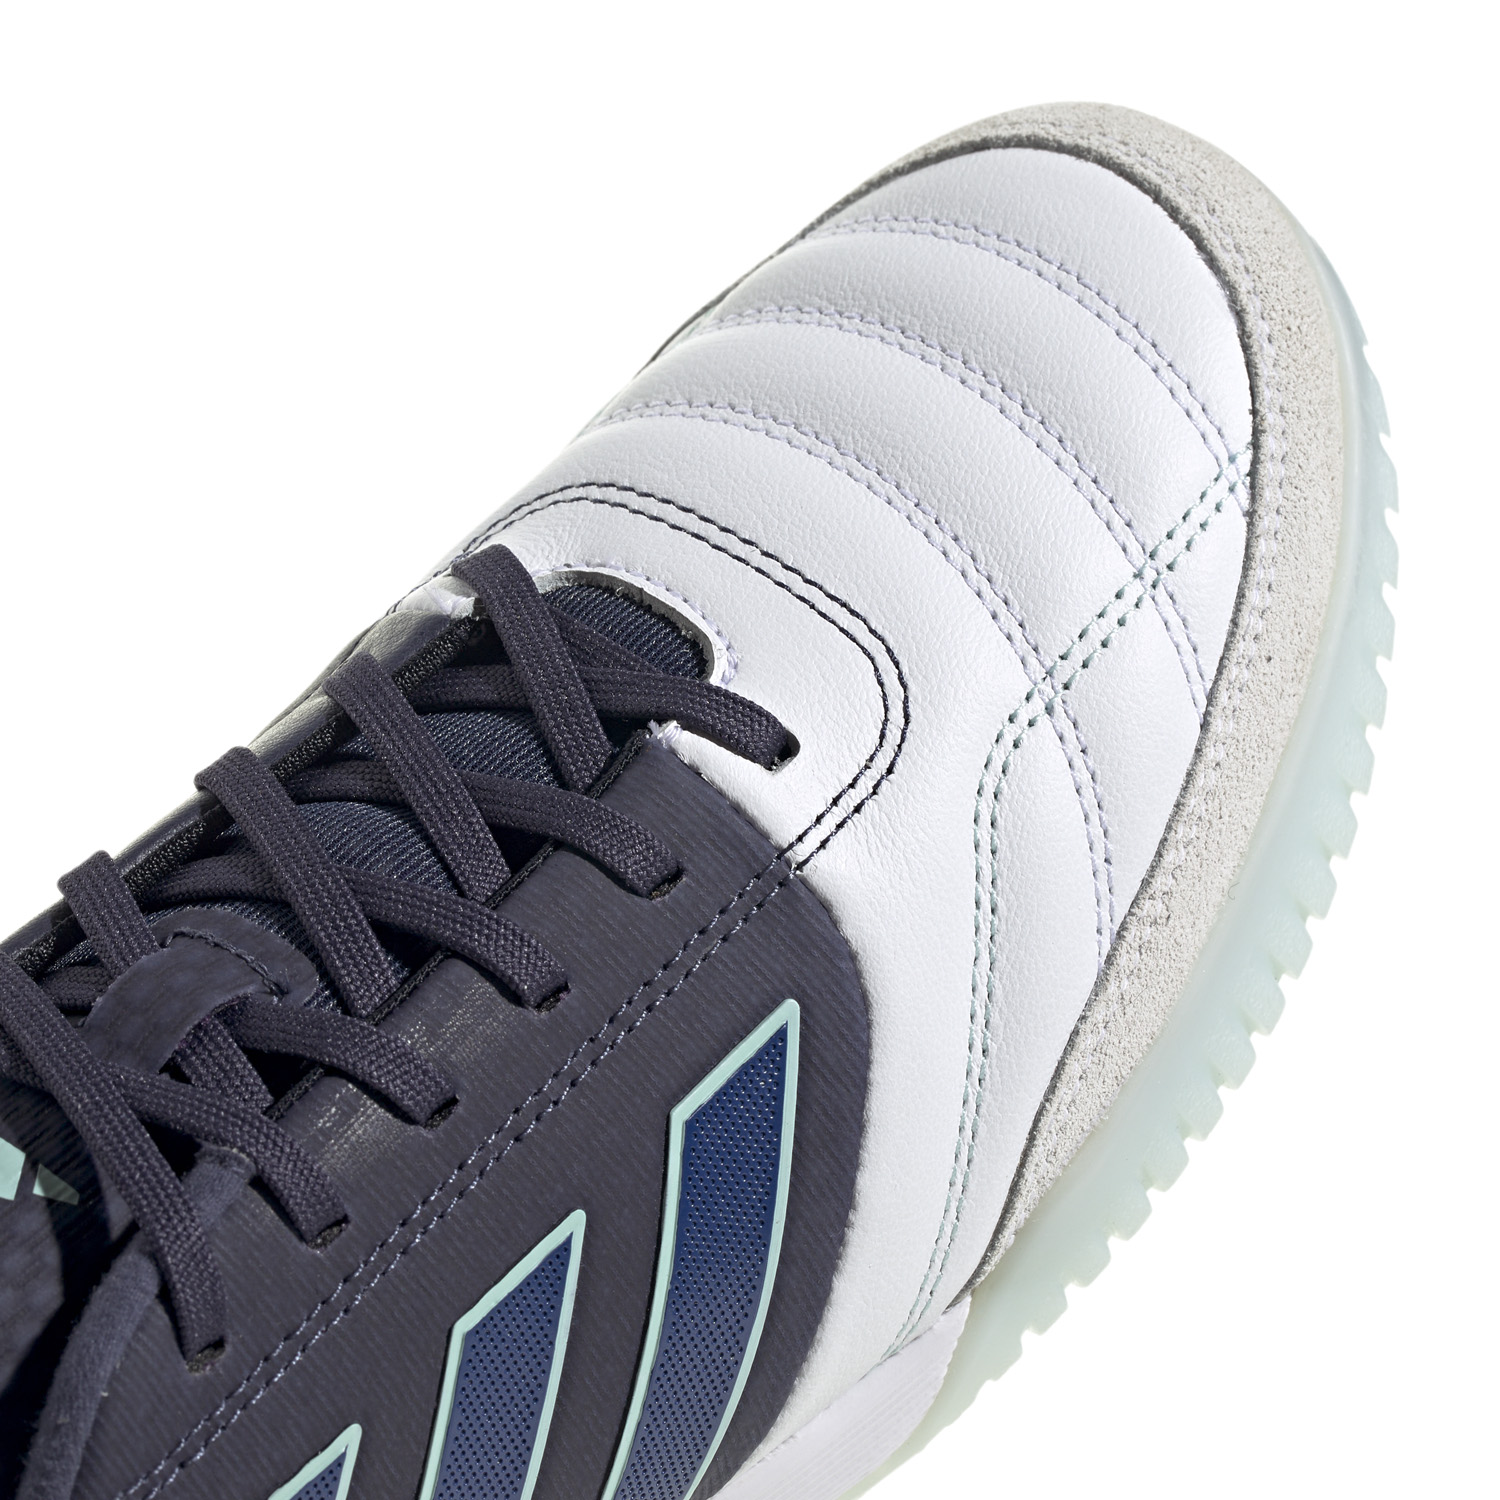 adidas Top Sala Competition Indoor SoccerEvolution (Navy/White) @ Soccer Shoes